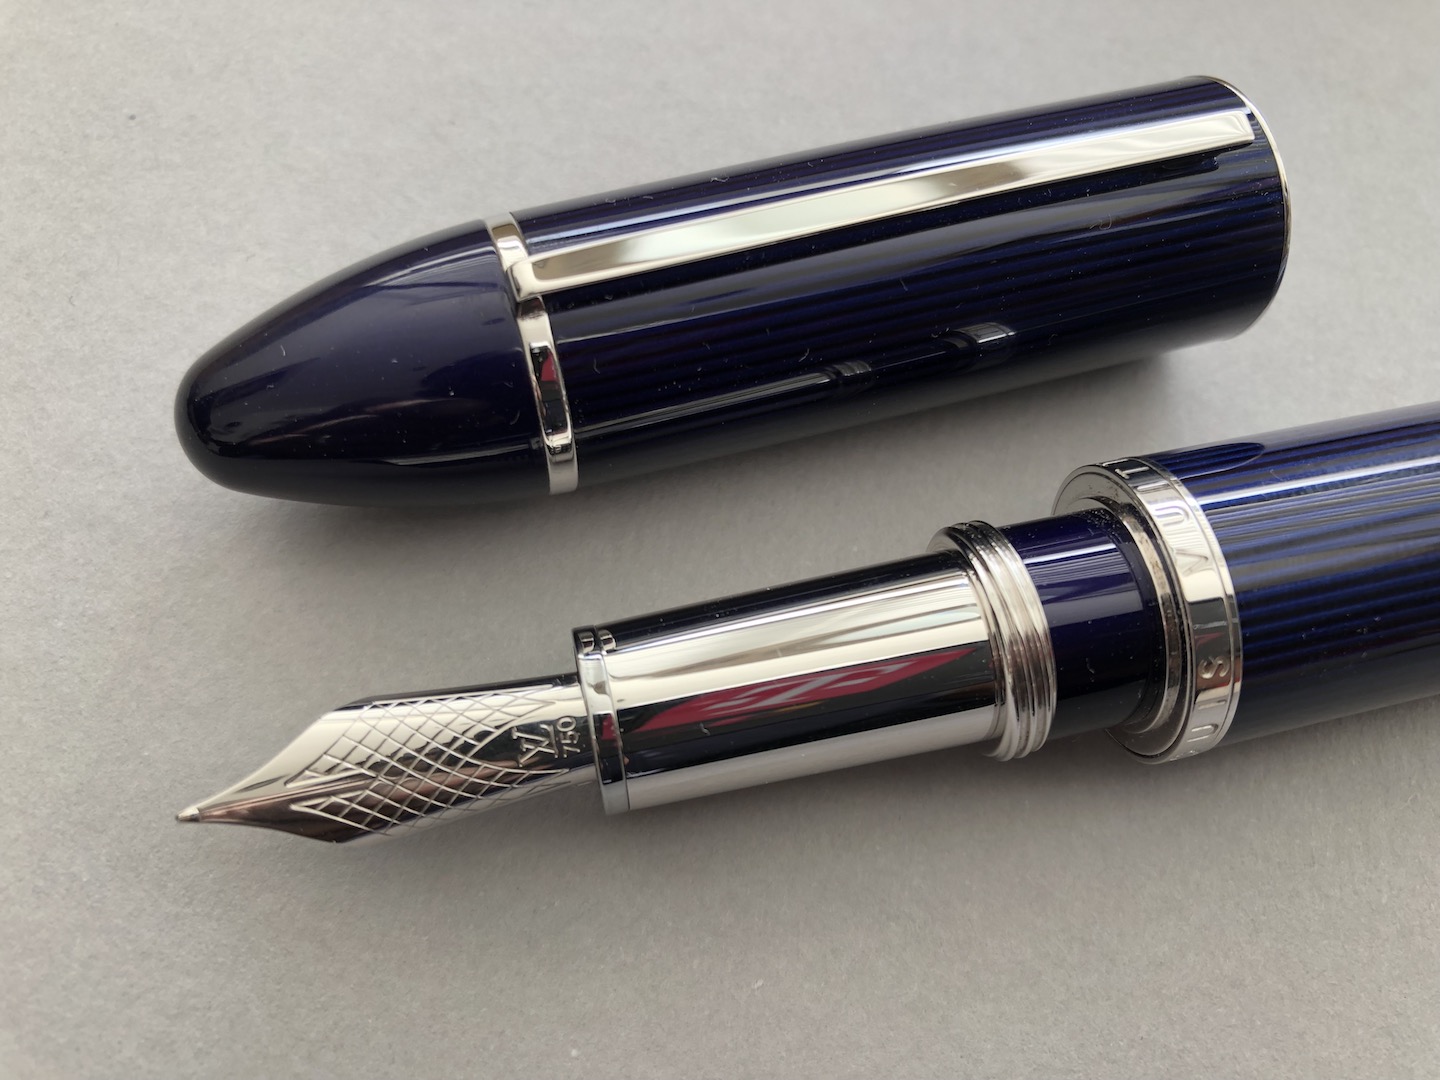 Sold at Auction: Louis Vuitton, LOUIS VUITTON FOUNTAIN PEN CARGO  COLLECTION. IN BLUE LACQUER WITH BLACK STRIPES AND PLATINUM PLATING DETAILS.